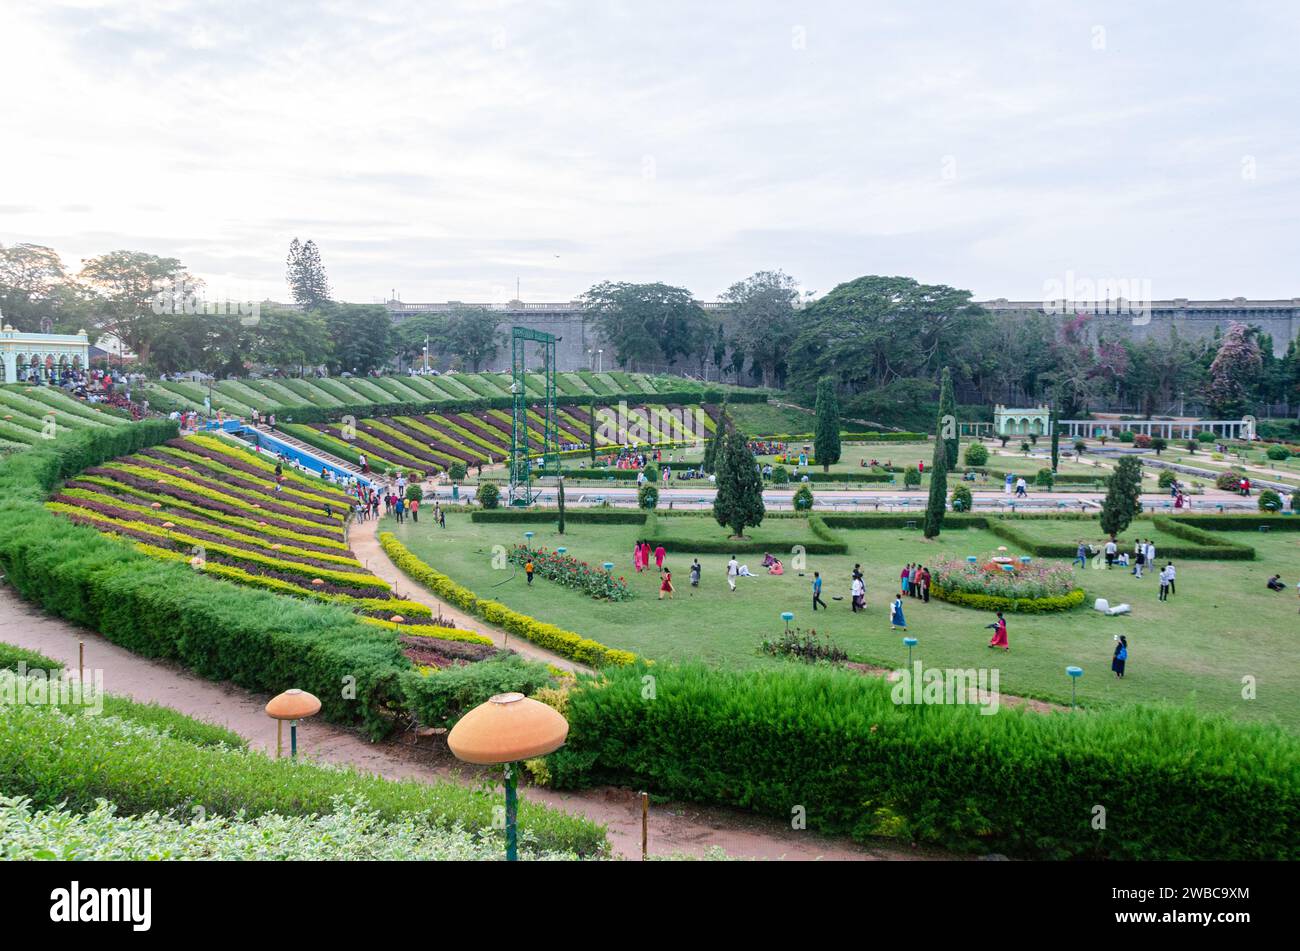 Brindavana Gardens at Mysore. KRS Dam is seen in the background Stock Photo